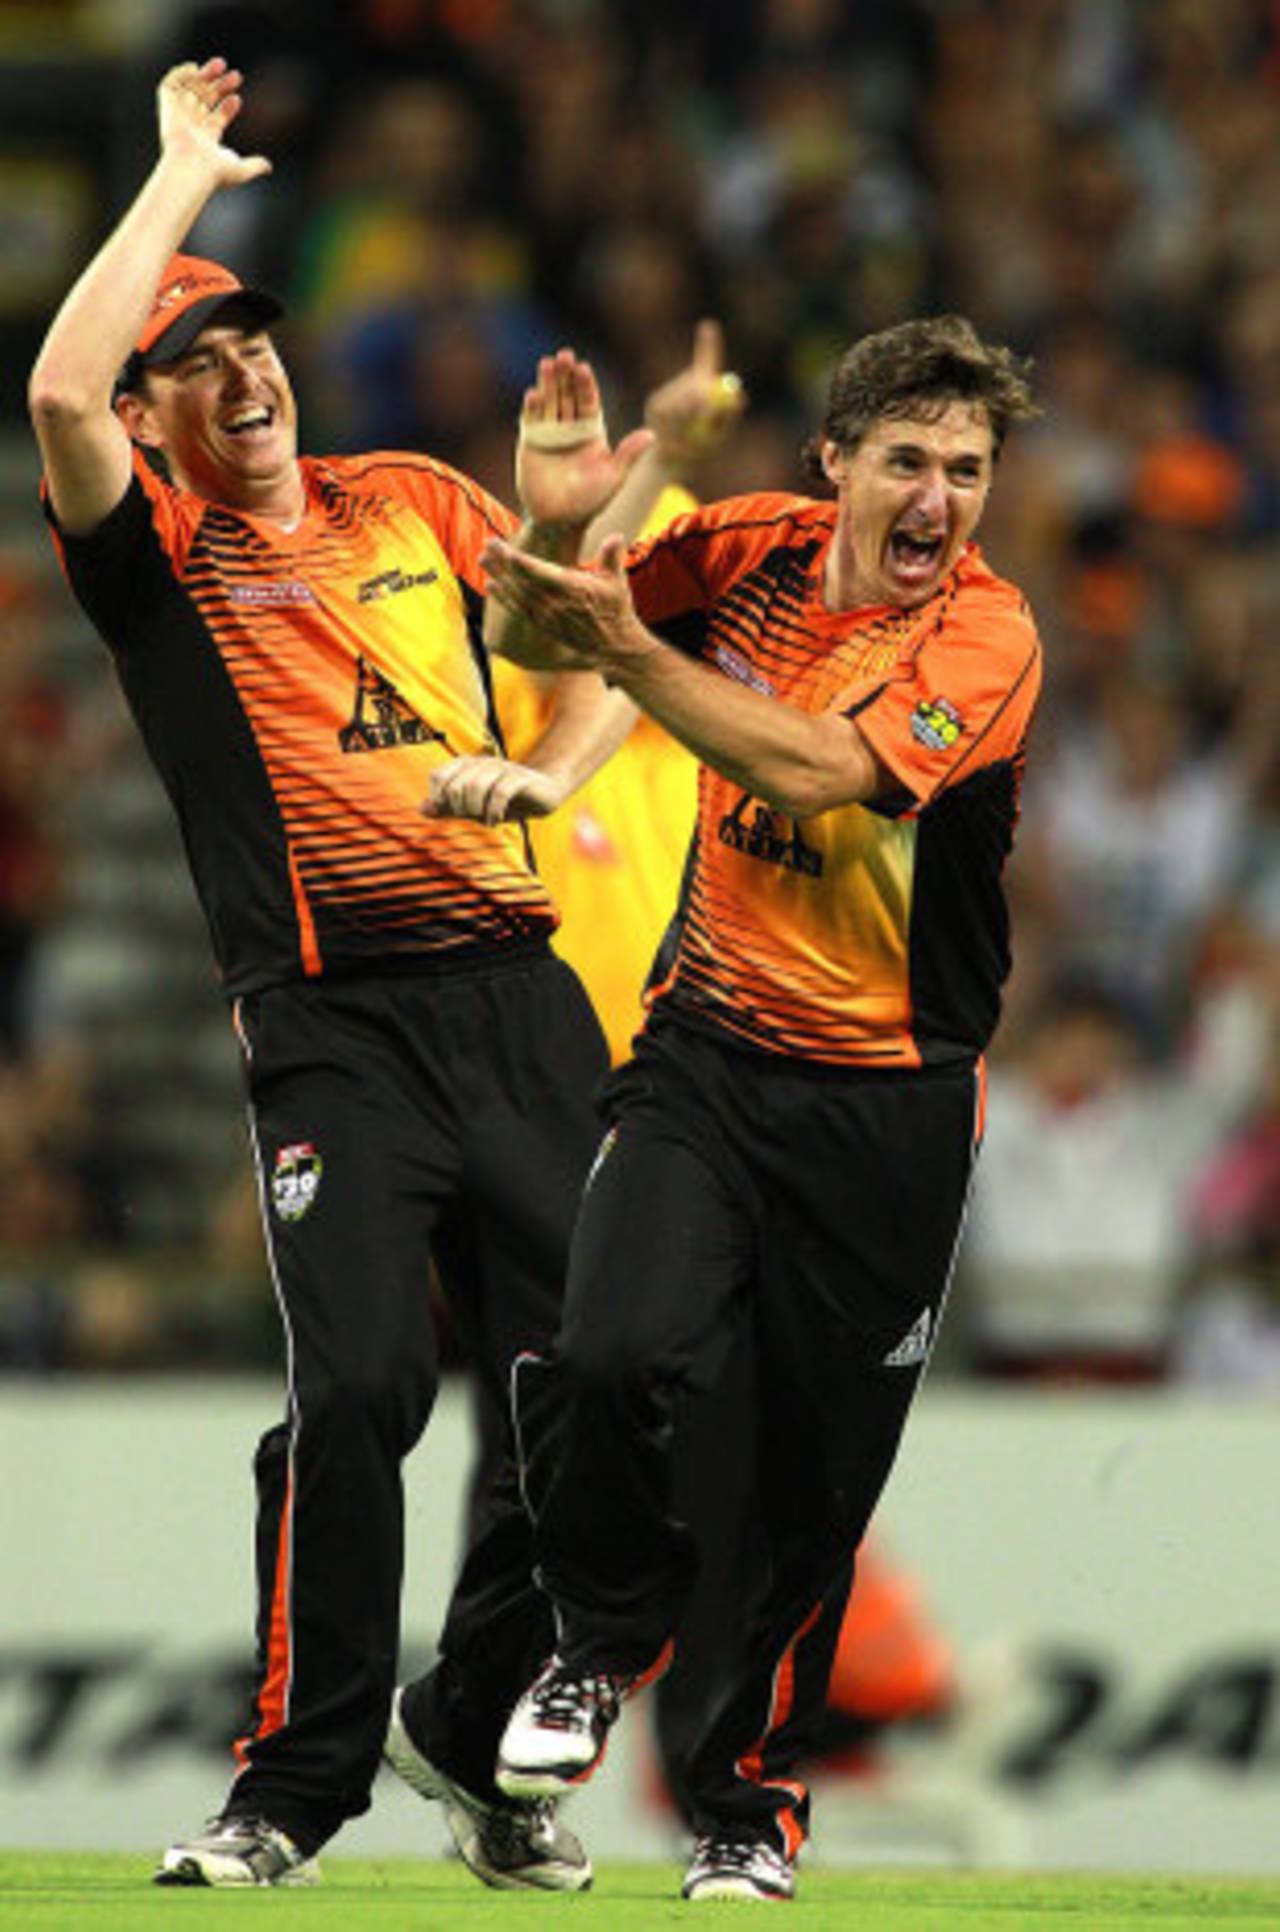 Brad Hogg's success in the BBL even led to a call-up to Australia's T20 side&nbsp;&nbsp;&bull;&nbsp;&nbsp;Getty Images